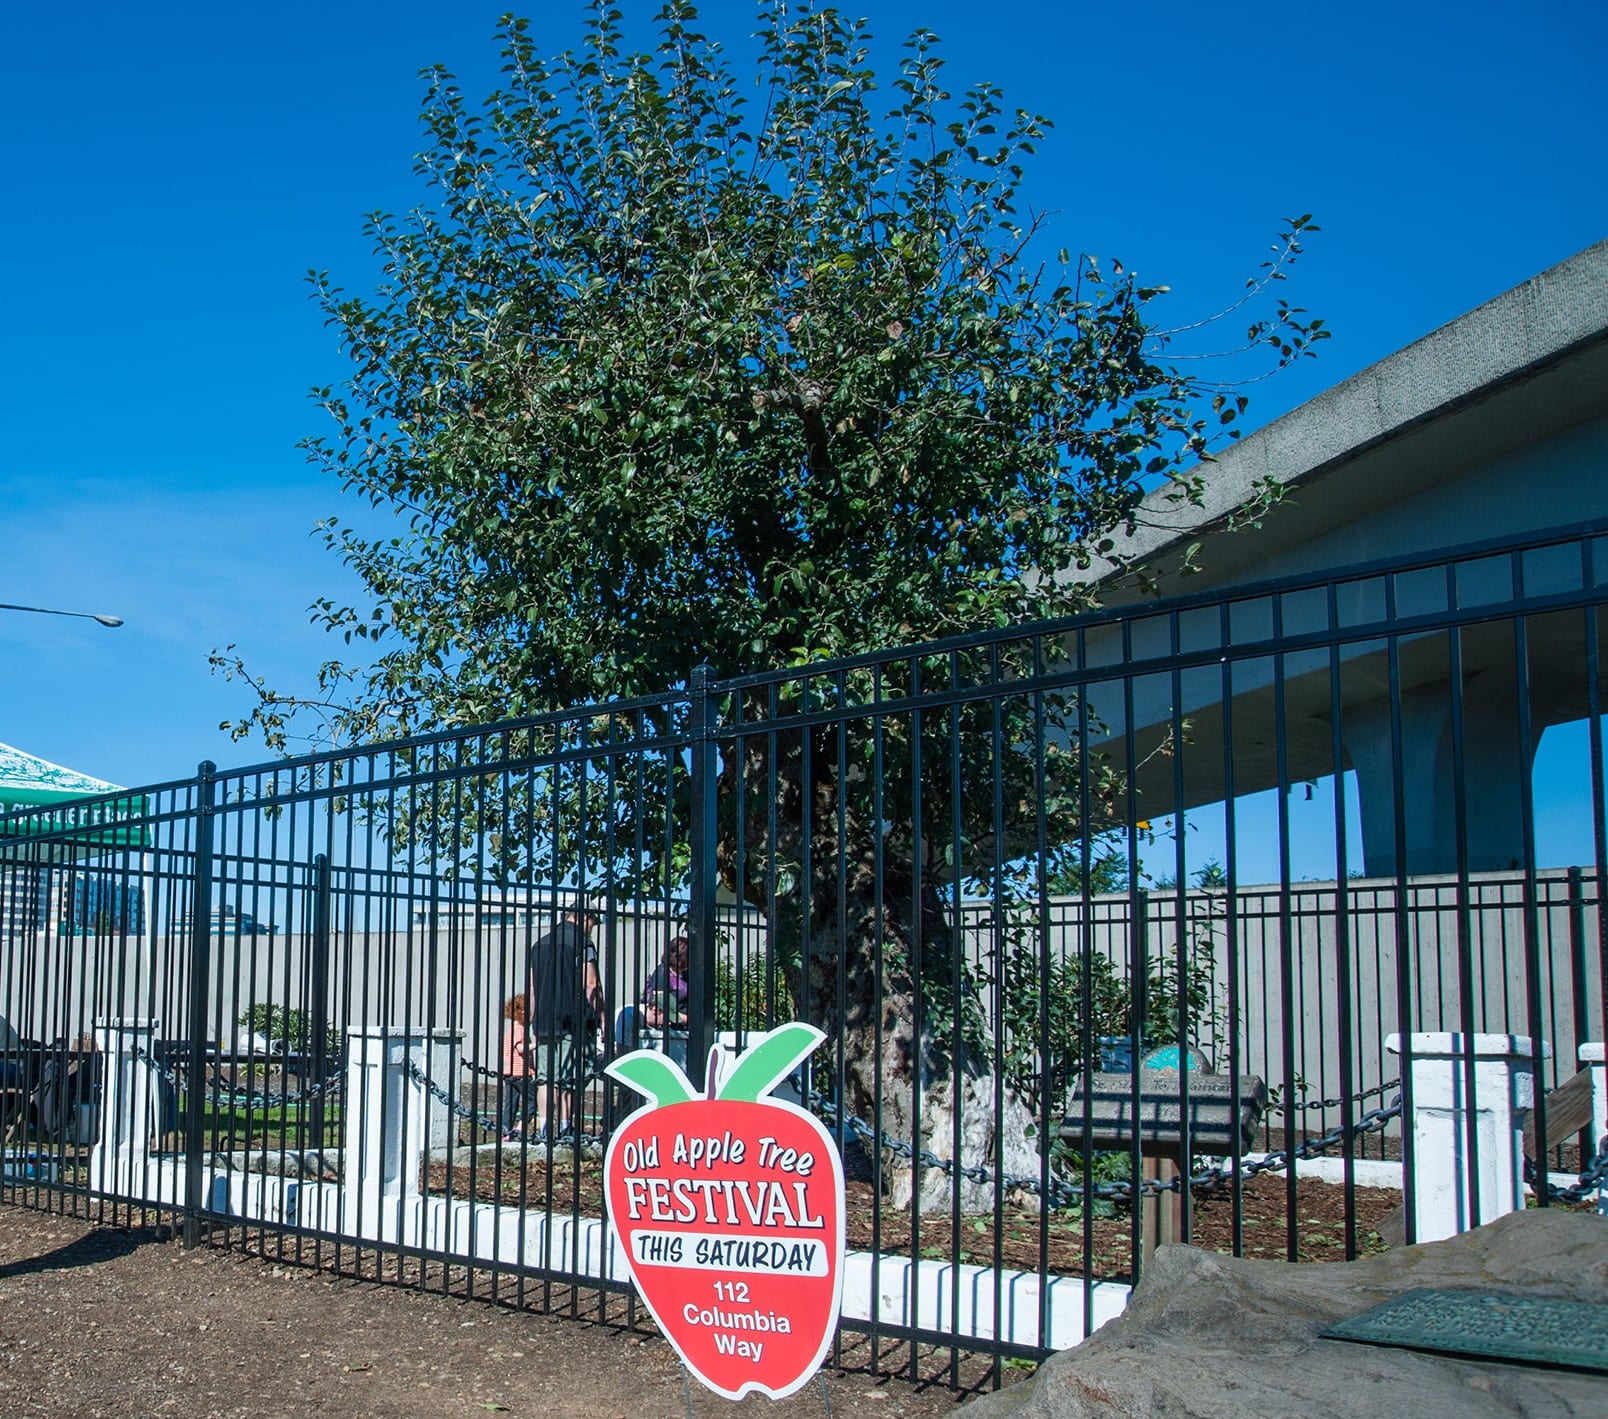 Vancouver's Old Apple Tree dies, but it's legacy lives on - clarkcountytoday.com